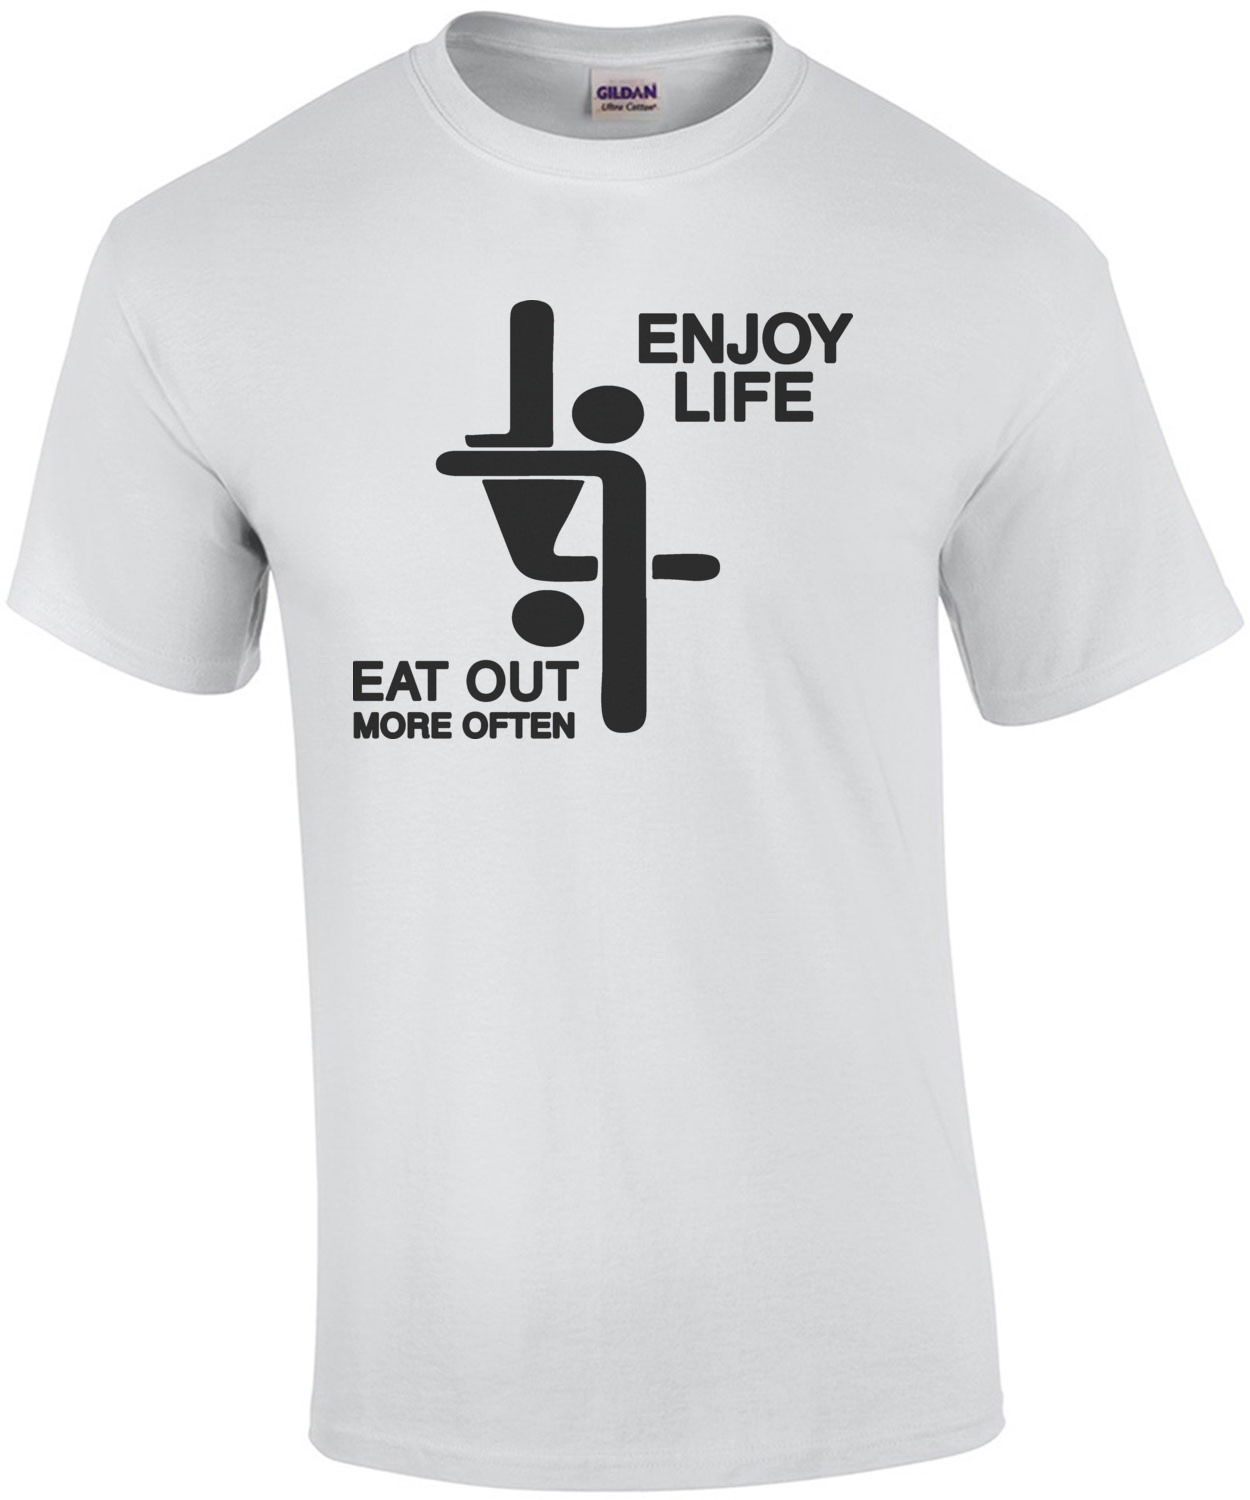 Enjoy Life. Eat out more often. Funny T-shirt